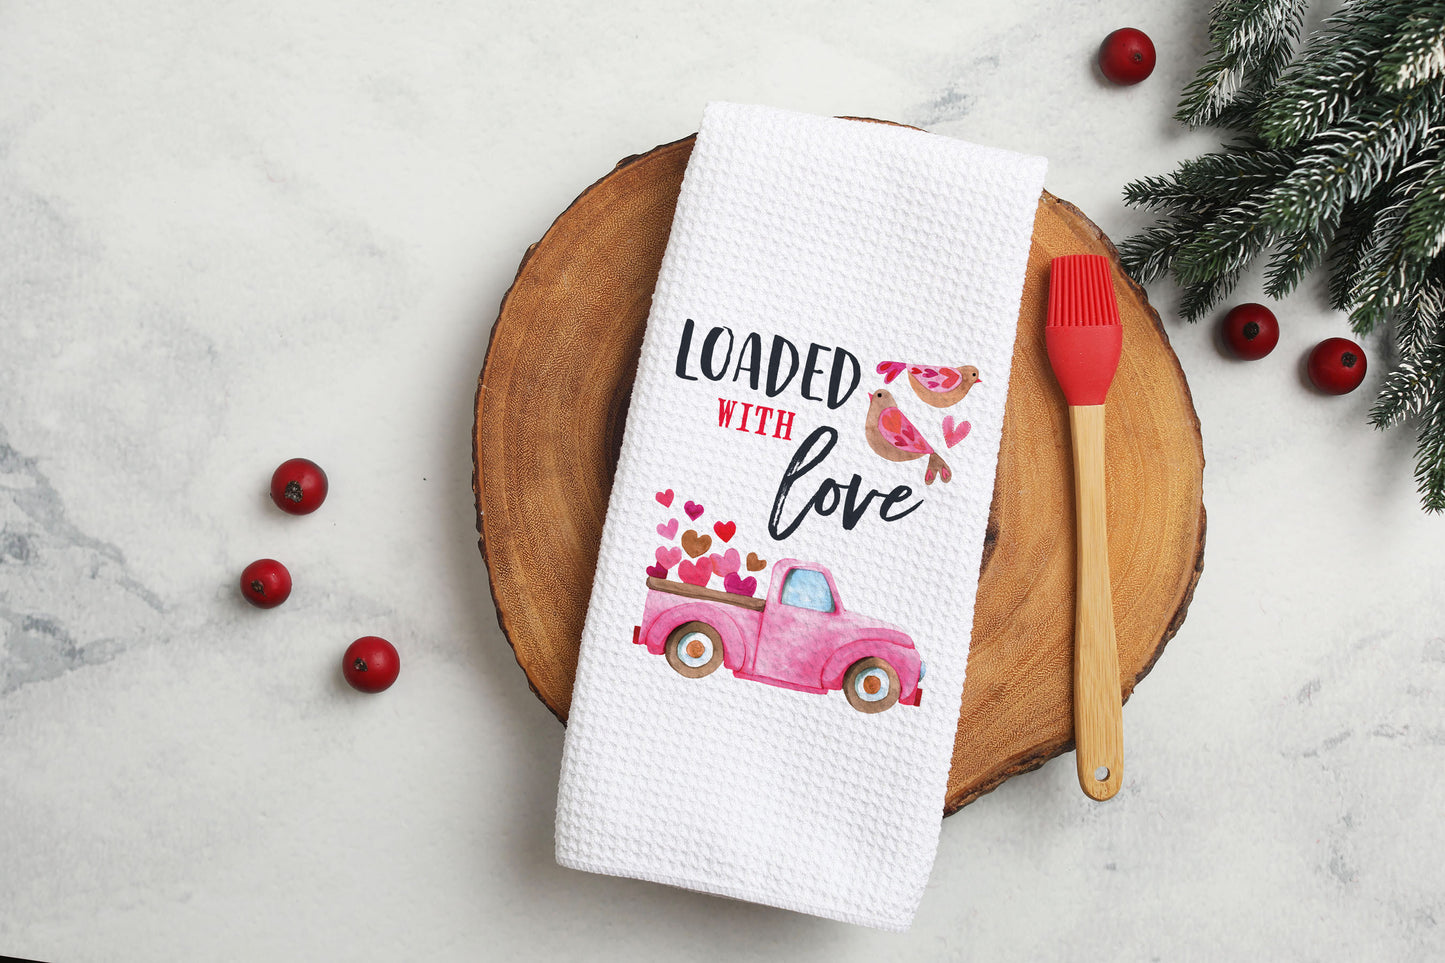 Loaded with Love Valentine Truck Towel